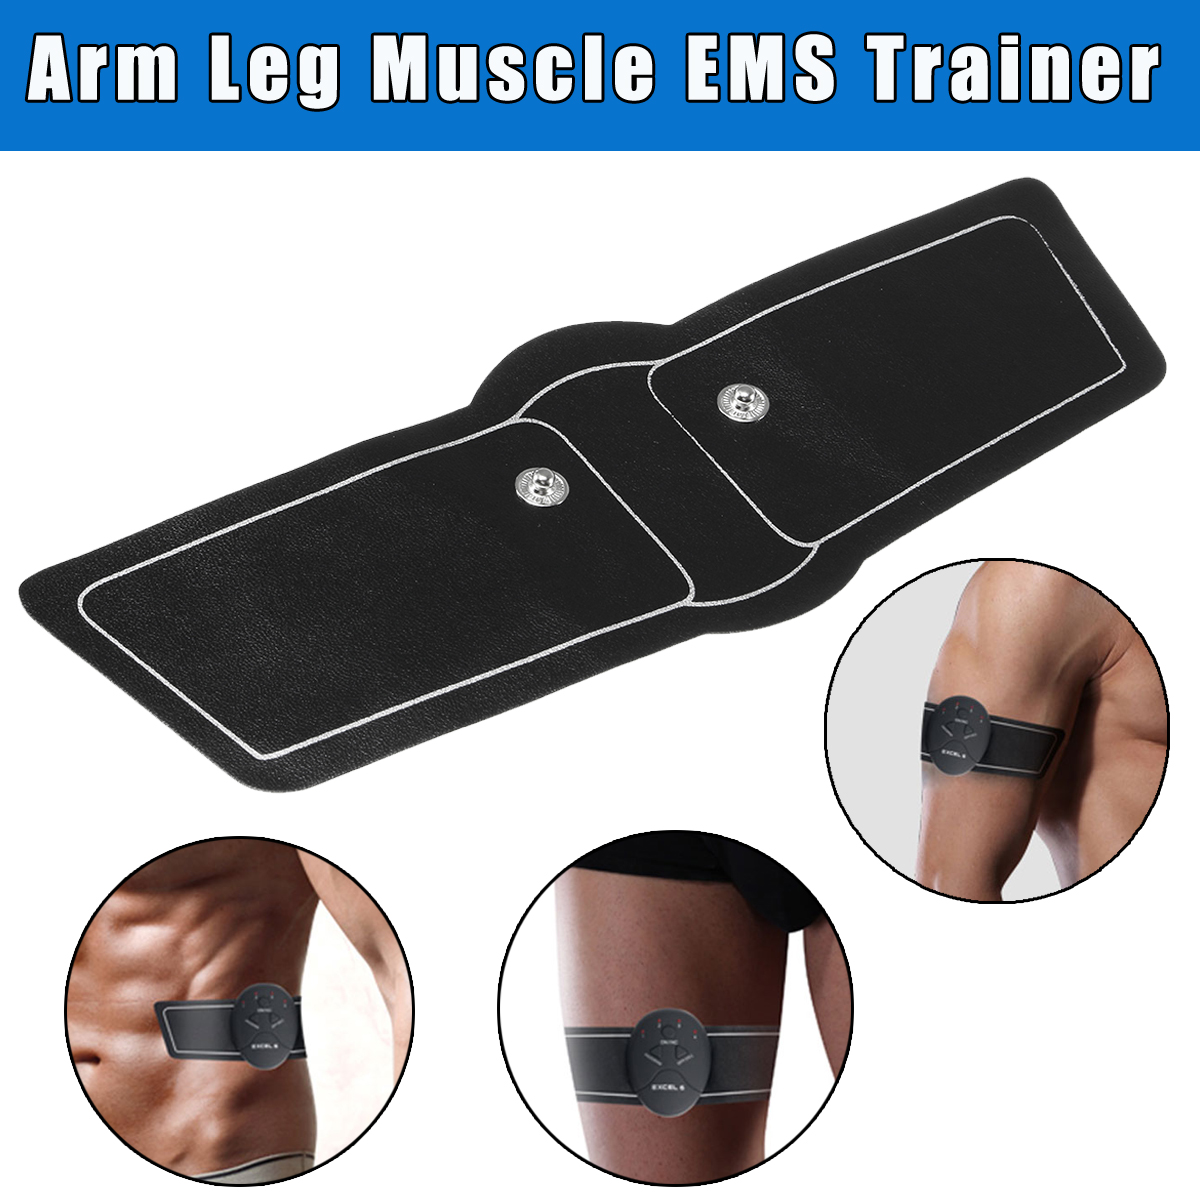 Arm-Leg-Muscle-EMS-Training-Electrical-Body-Shape-Fitness-Home-Trainer-Abs-1243392